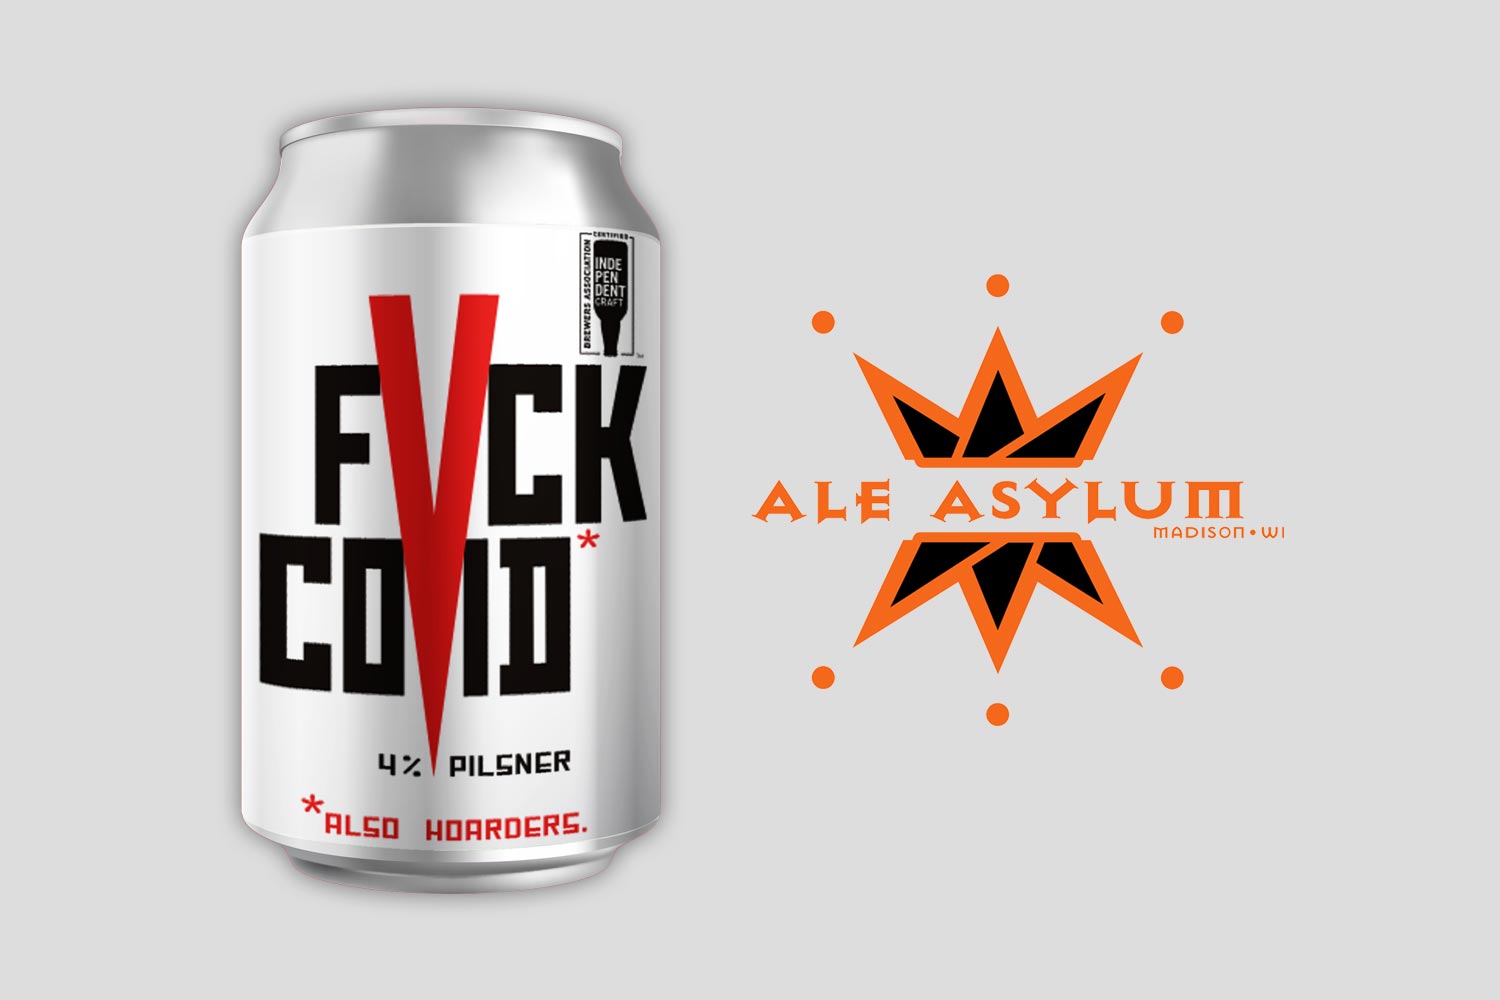 Details about   FVCK CVID* also hoarders 12oz ALUMINUM EMPTY ALE ASYLUM BEER CAN 